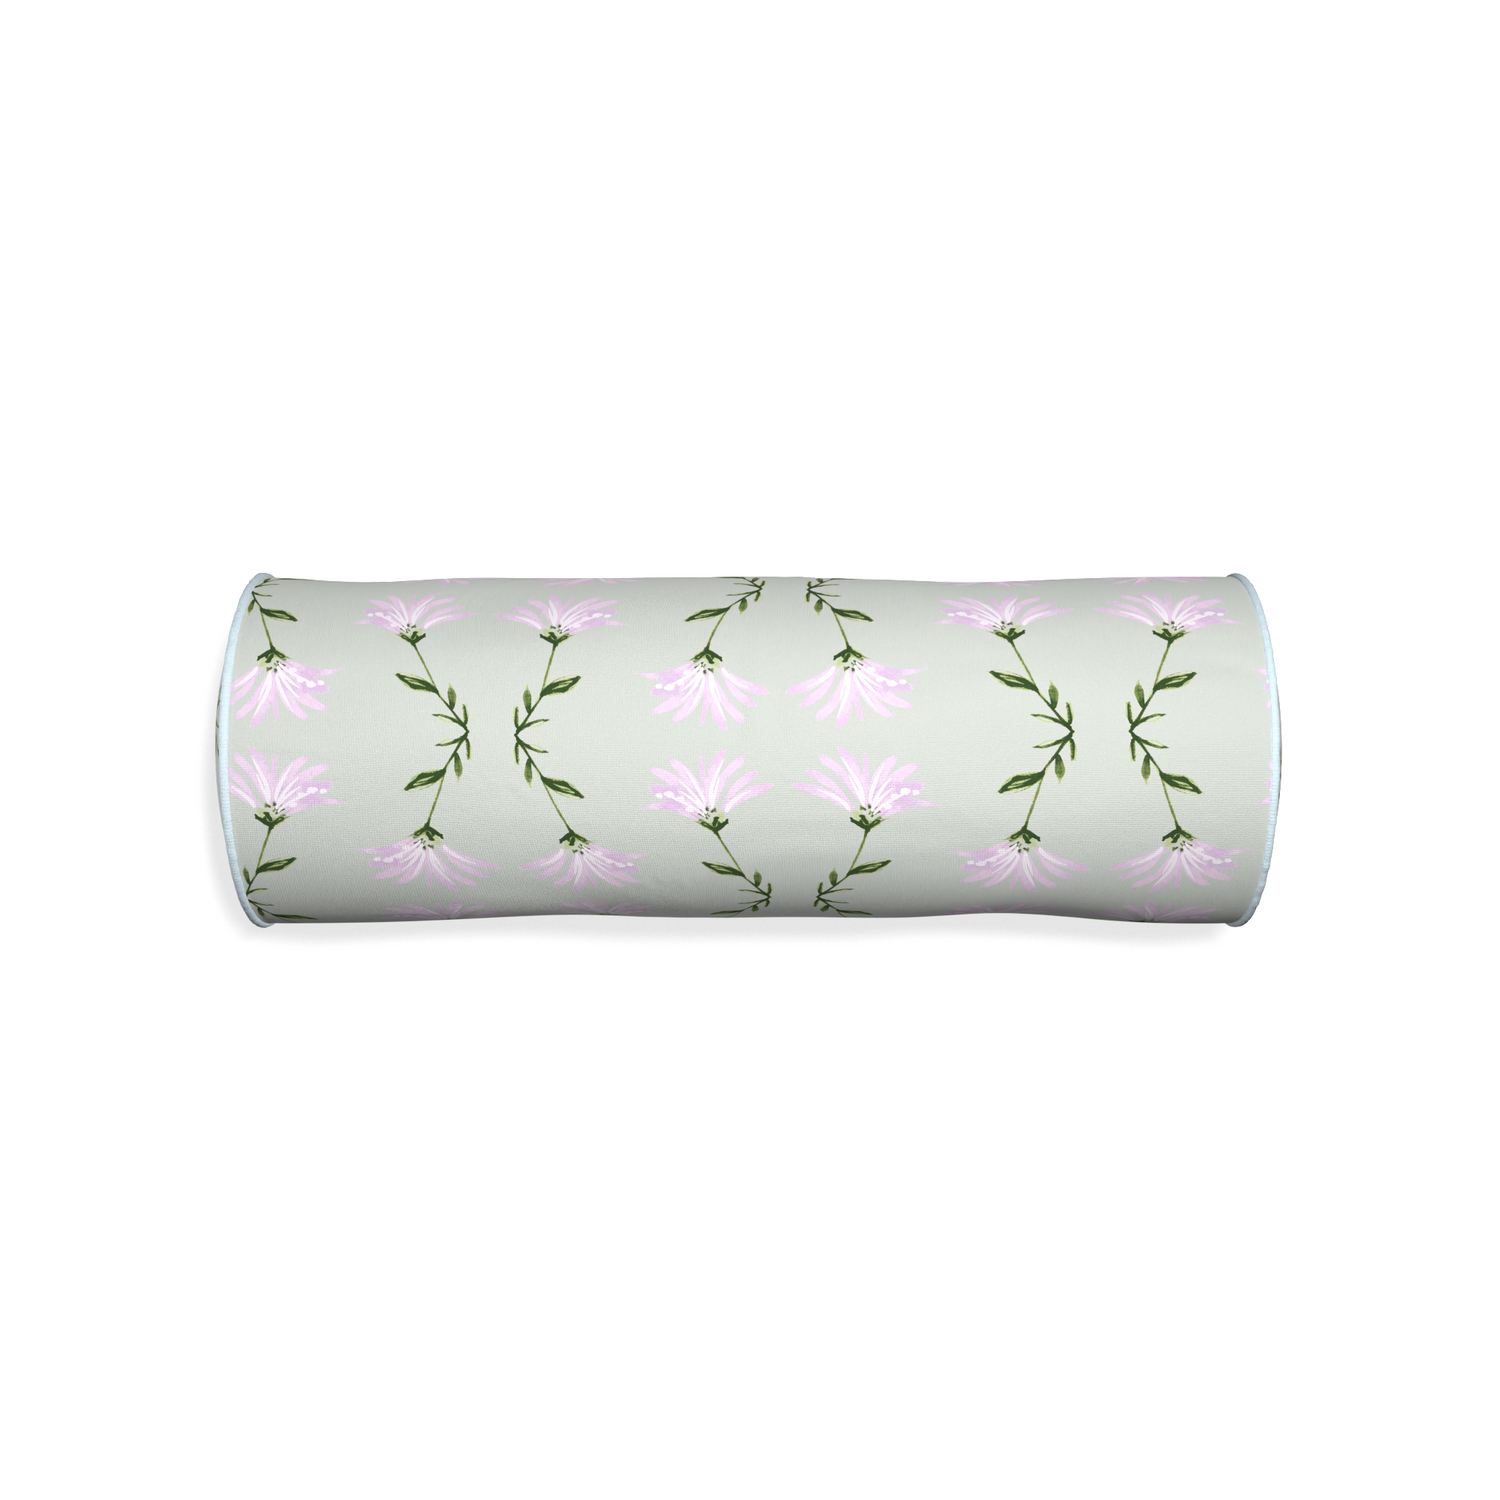 Bolster marina sage custom pillow with powder piping on white background